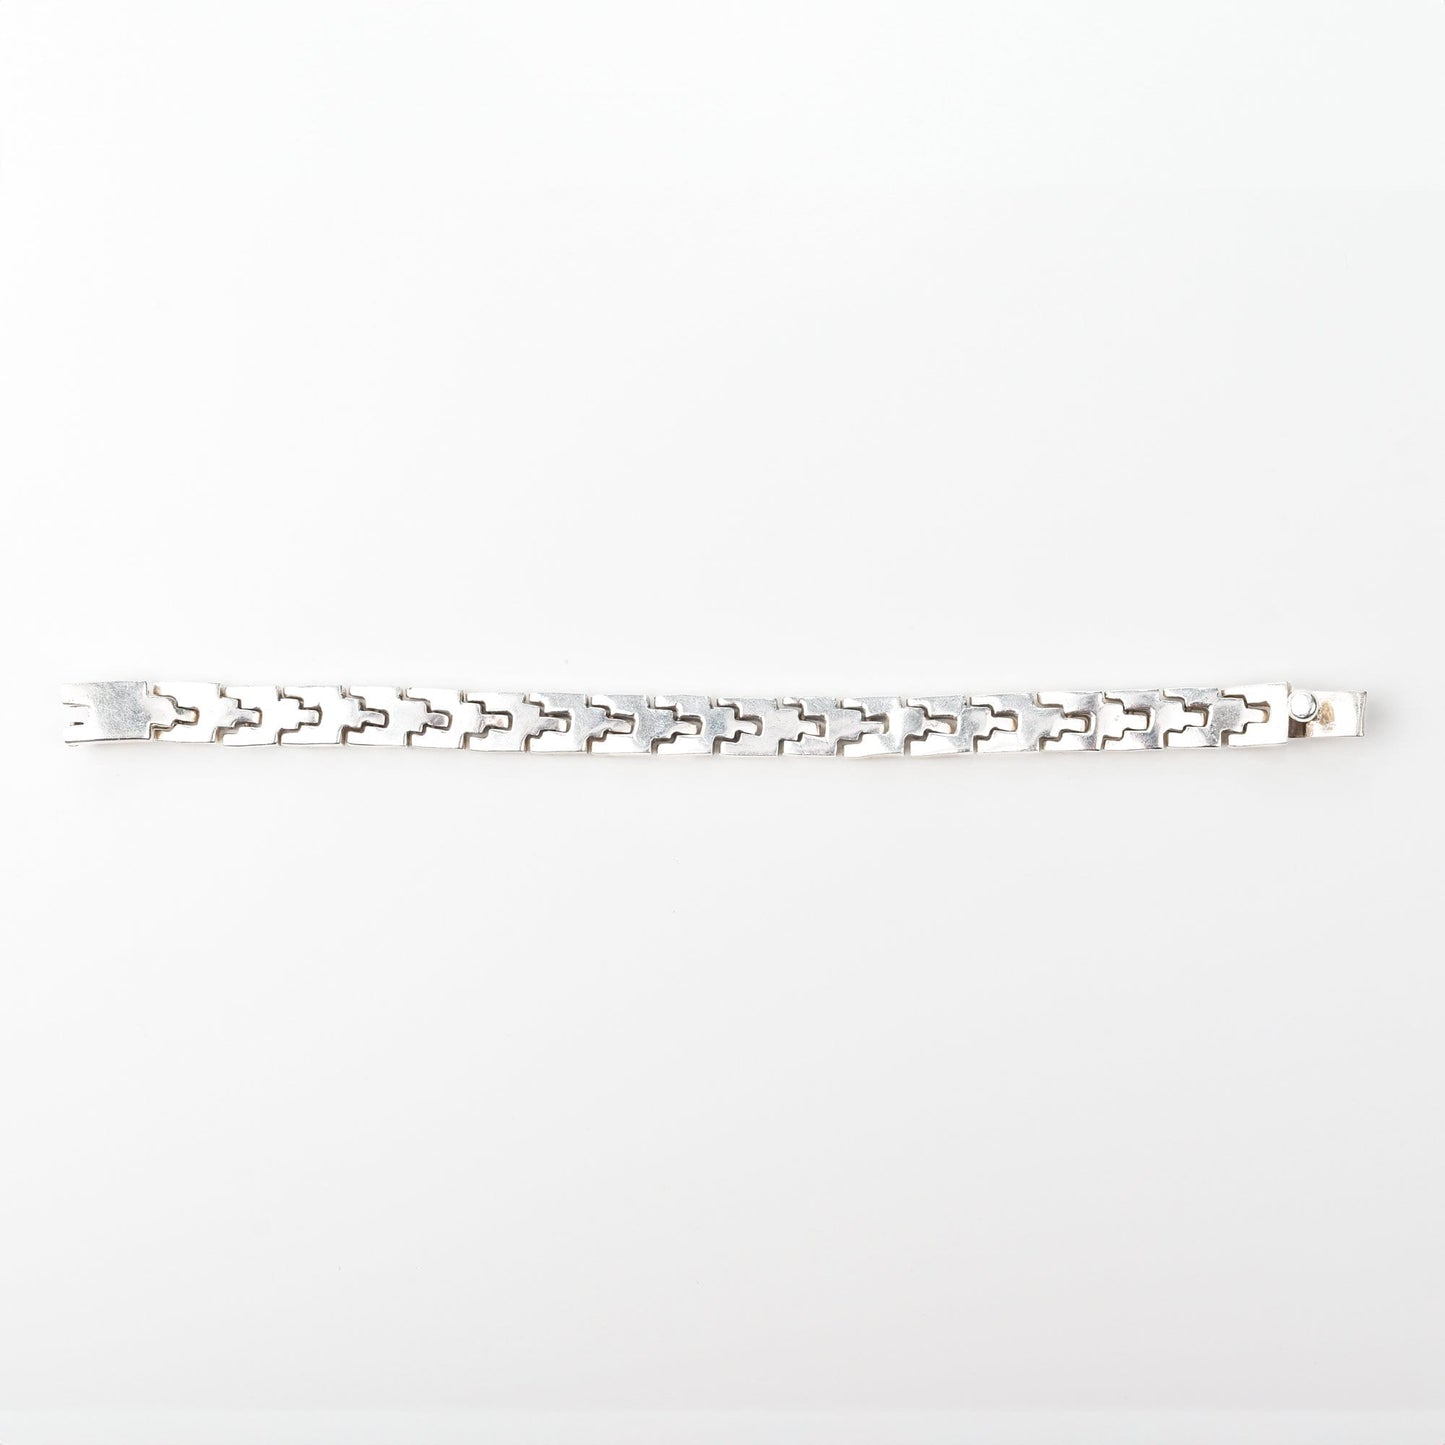 Mexican Sterling Silver Link Bracelet, Heavy Articulated Chain, Unisex Bracelet, 8.25" L